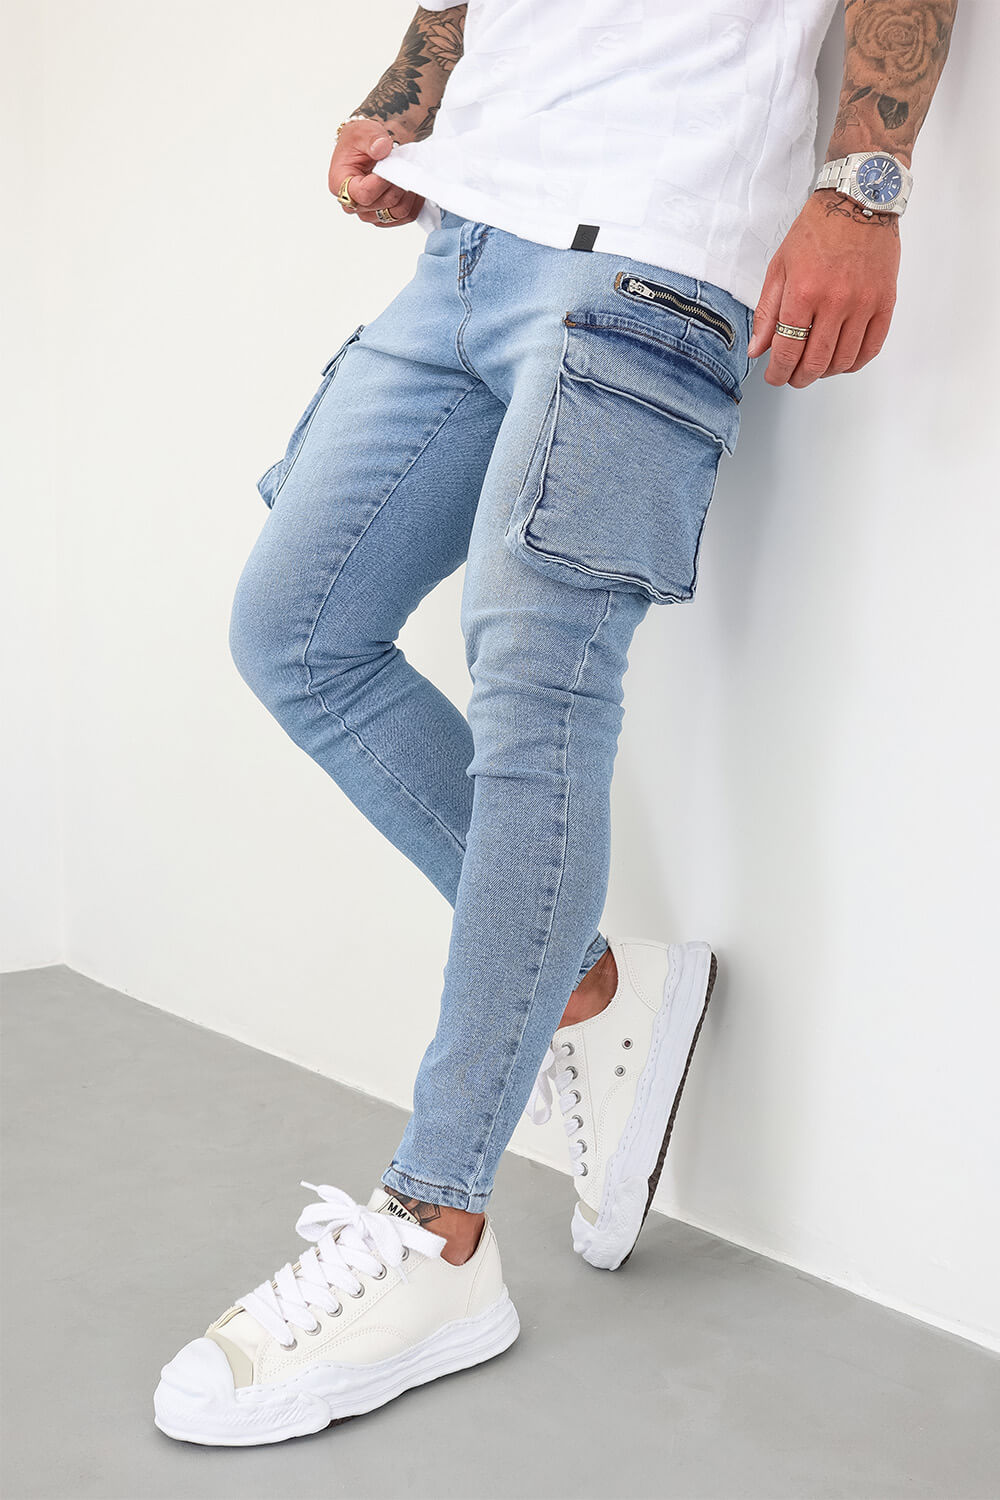 Sinners Attire Jeans | Men's Ripped & Repaired Jeans | Jeans for Men - SINNERS ATTIRE